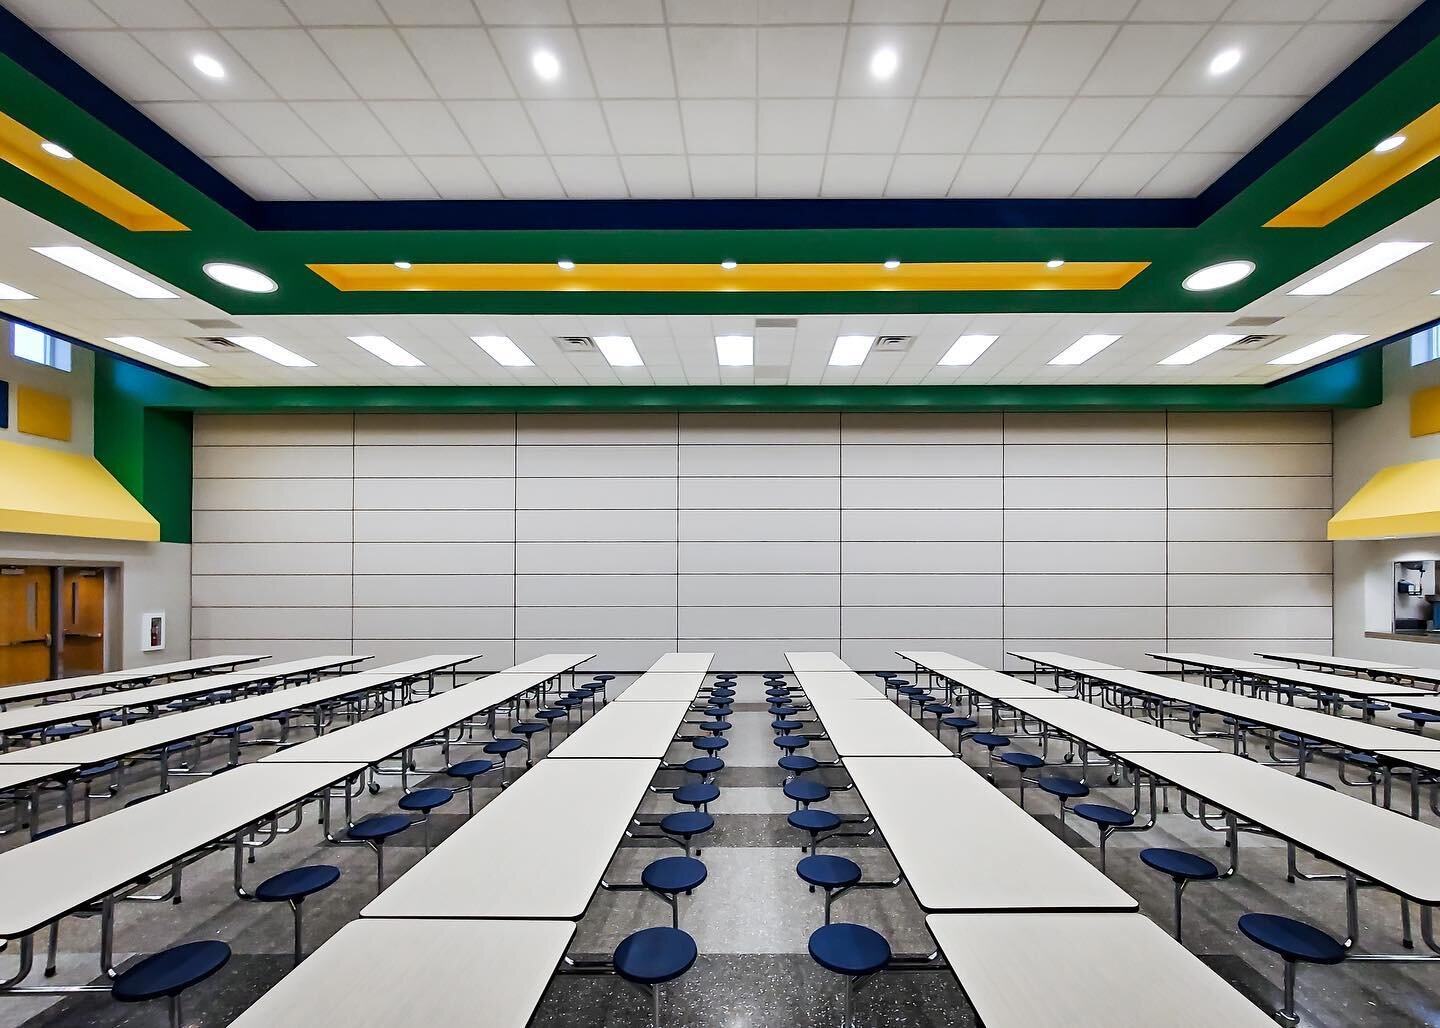 New Reams Road Elementary School uses @skyfoldwalls to partition cafeteria from gym with this sound blocking Skyfold Classic. A great addition to add flexibility to any multipurpose space.
Rated at 51-STC, this vertically lifting wall will allow spor